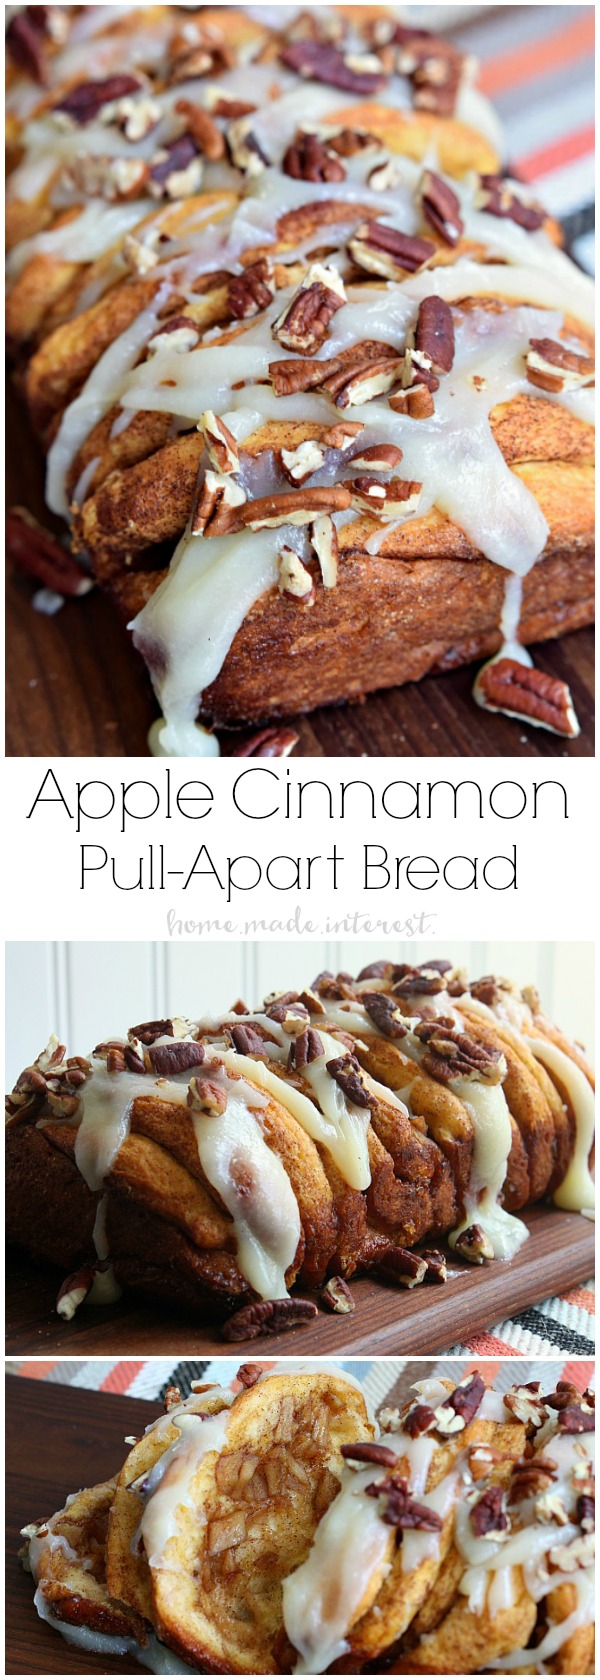 This apple cinnamon pull apart bread recipe is made extra easy because it uses canned biscuits. The biscuit dough is layered with apples, cinnamon, and sugar and baked until the flavors meld together into a sweet, spiced bread. This apple recipe is perfect for fall. Drizzle it with a cream cheese glaze and you have an easy fall dessert recipe that no one will be able to resist!